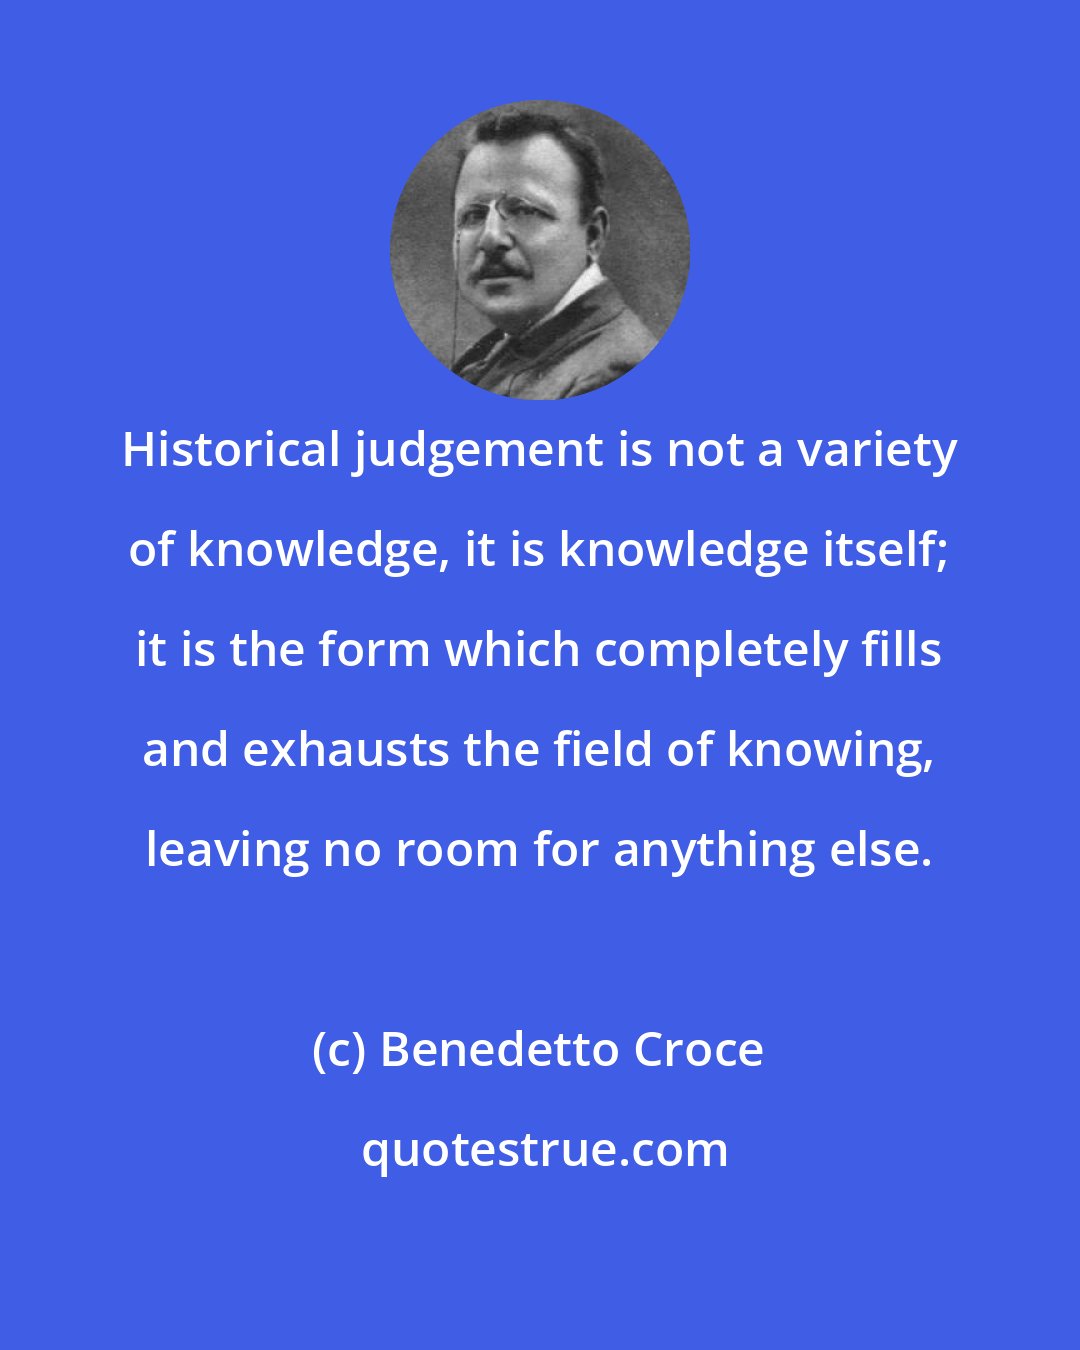 Benedetto Croce: Historical judgement is not a variety of knowledge, it is knowledge itself; it is the form which completely fills and exhausts the field of knowing, leaving no room for anything else.